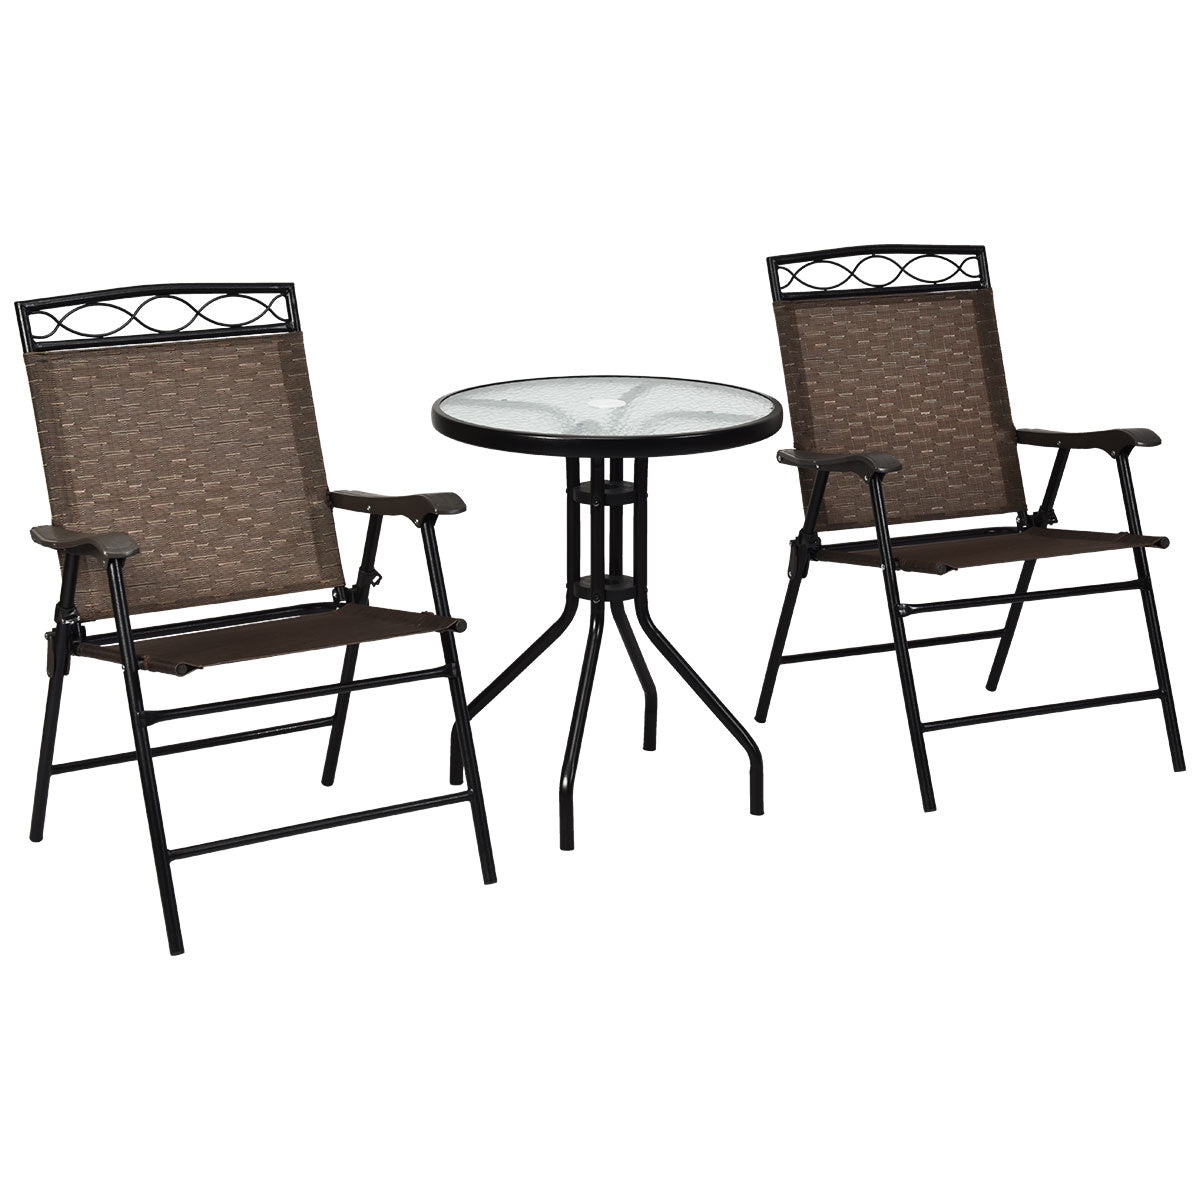 Giantex Patio Dining Set Round Glass Table with 2 Patio Folding Chairs(Brown)